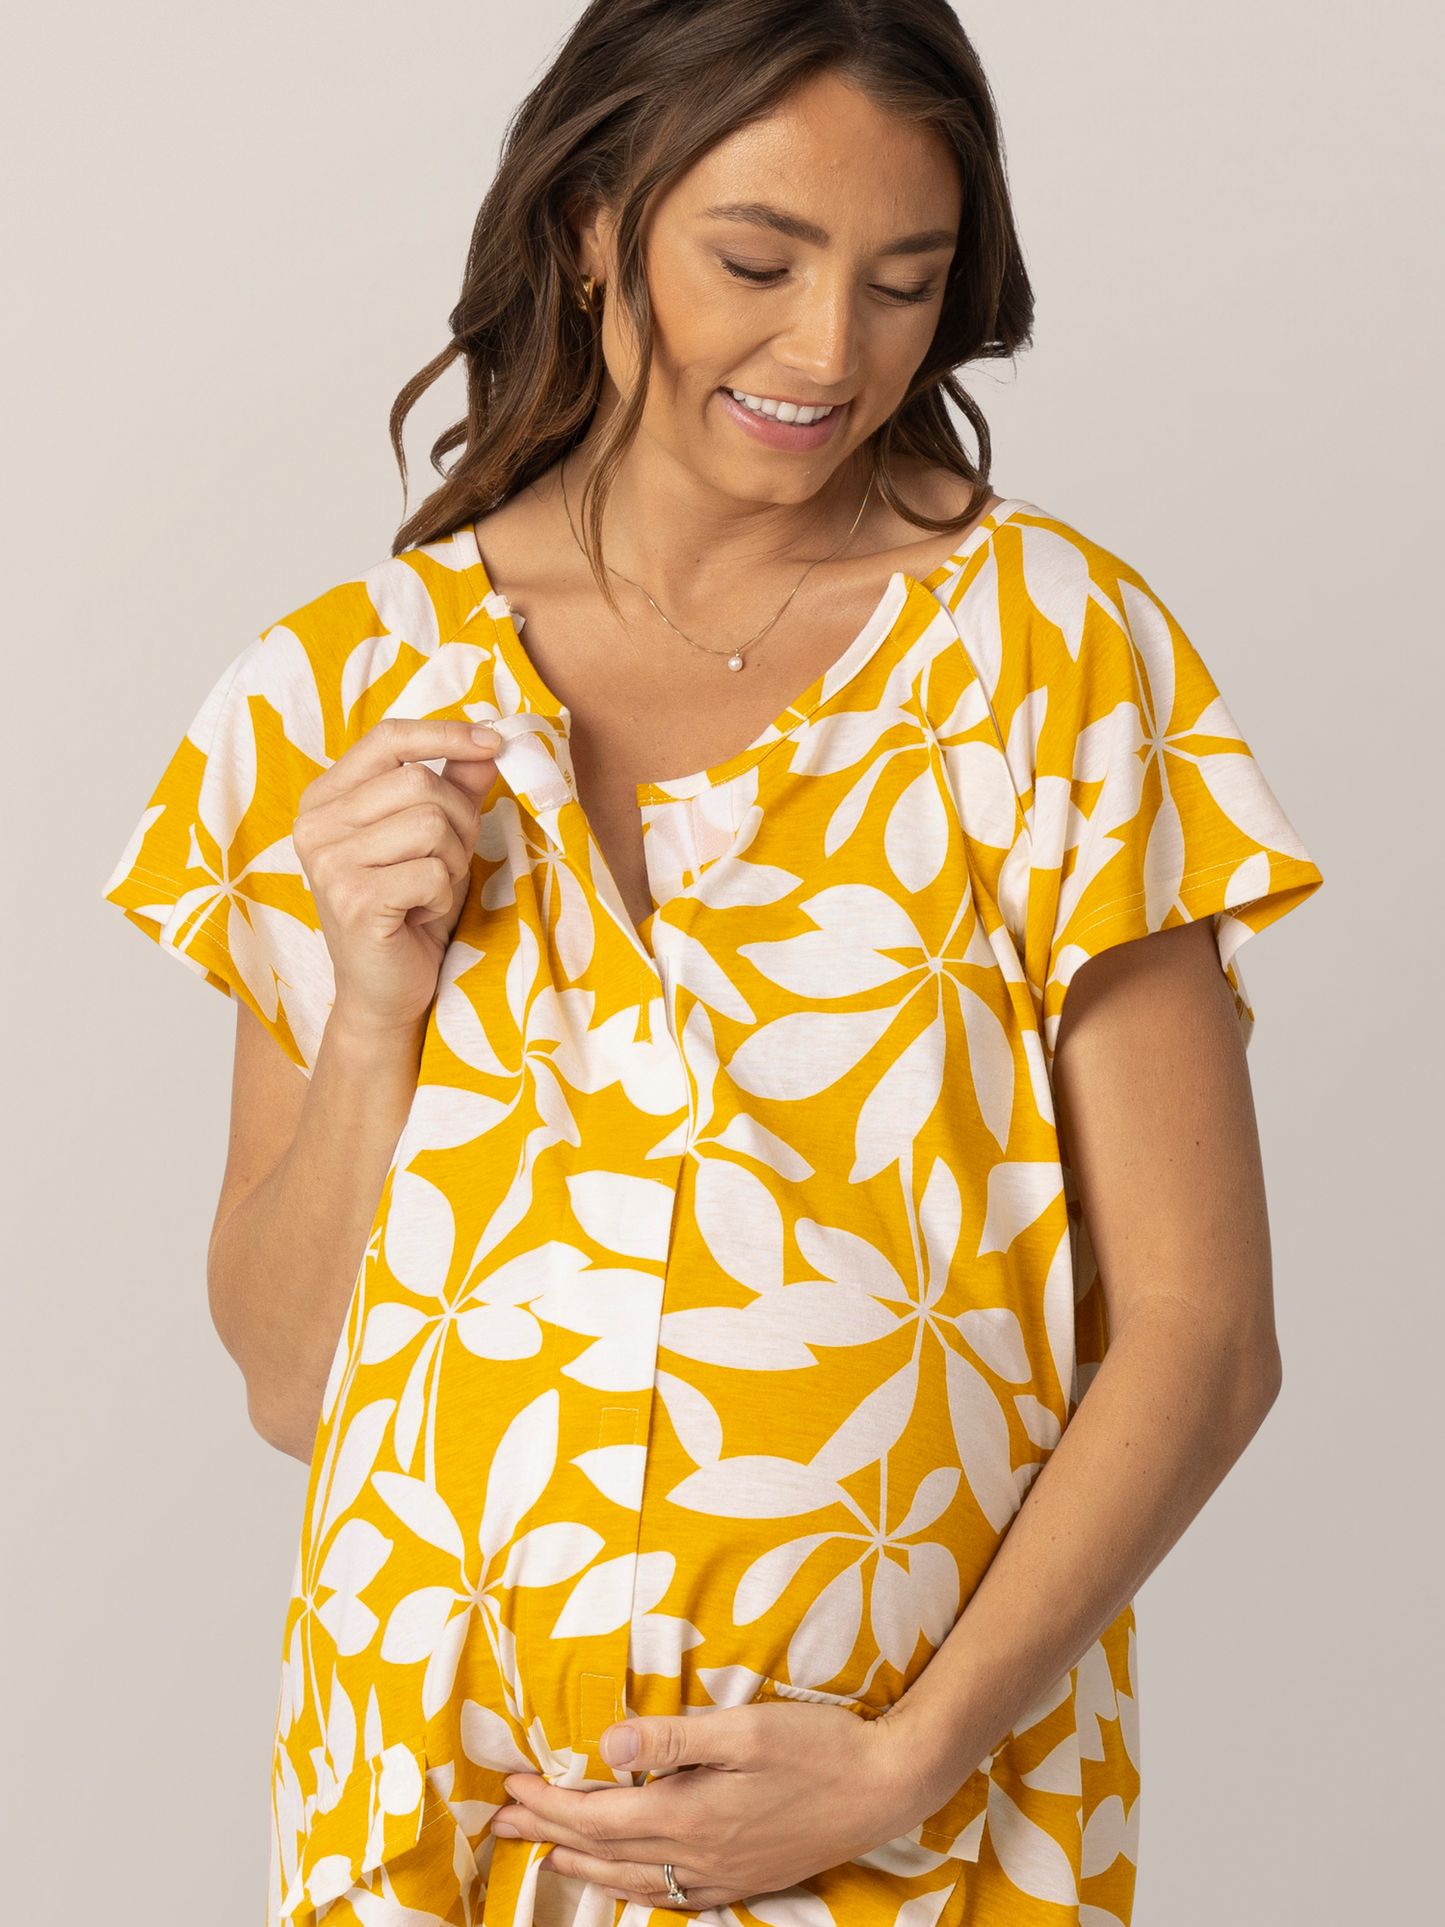 Detail view of front/middle velcro opening on the Universal Labor & Delivery Gown in Honey Leaf, on model